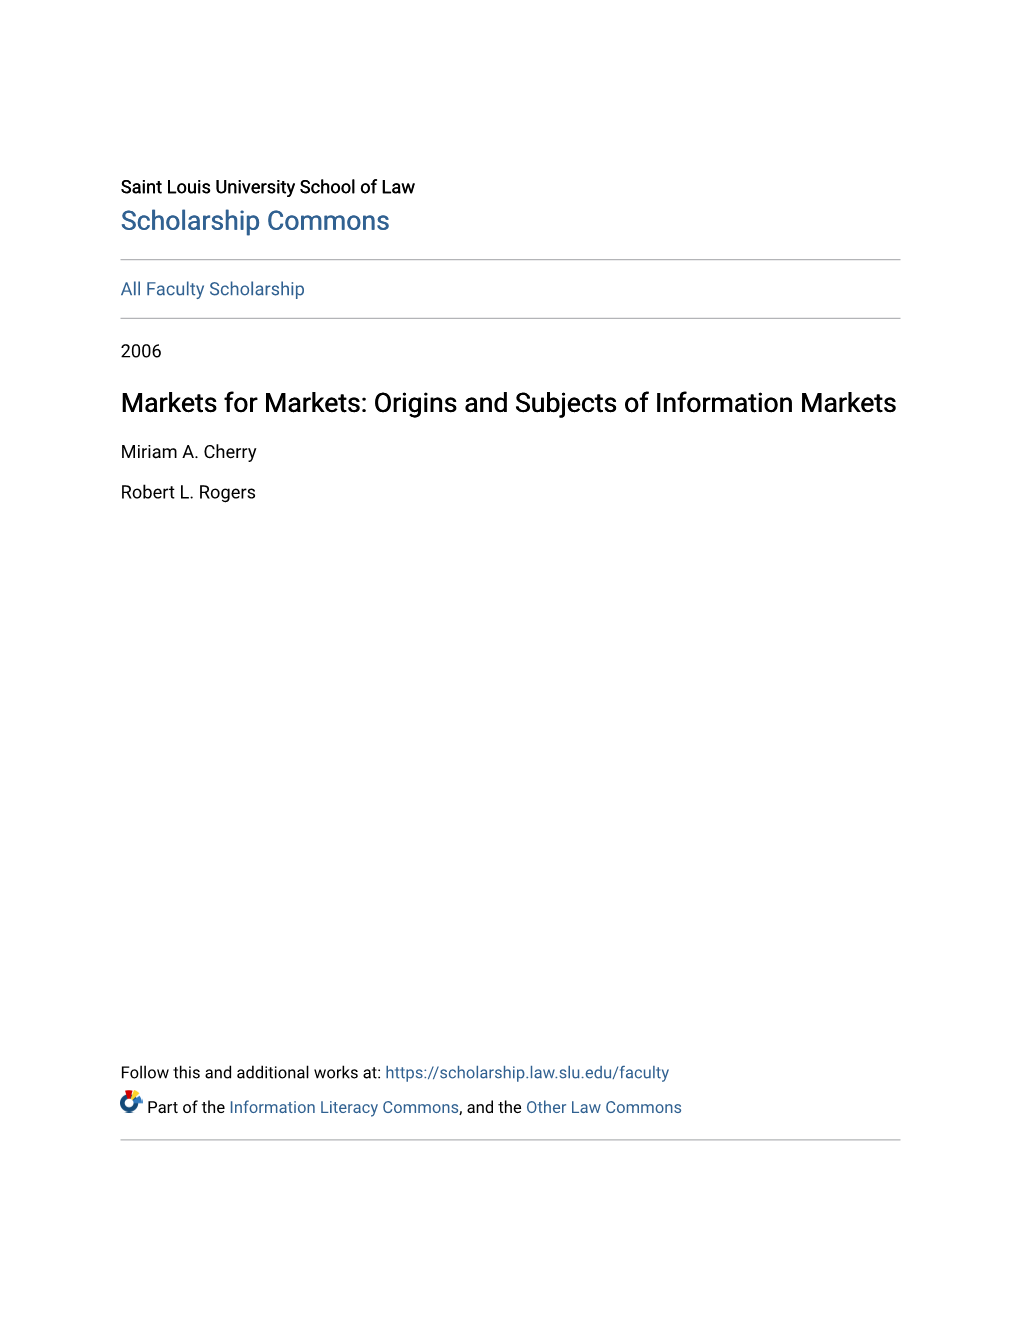 Markets for Markets: Origins and Subjects of Information Markets